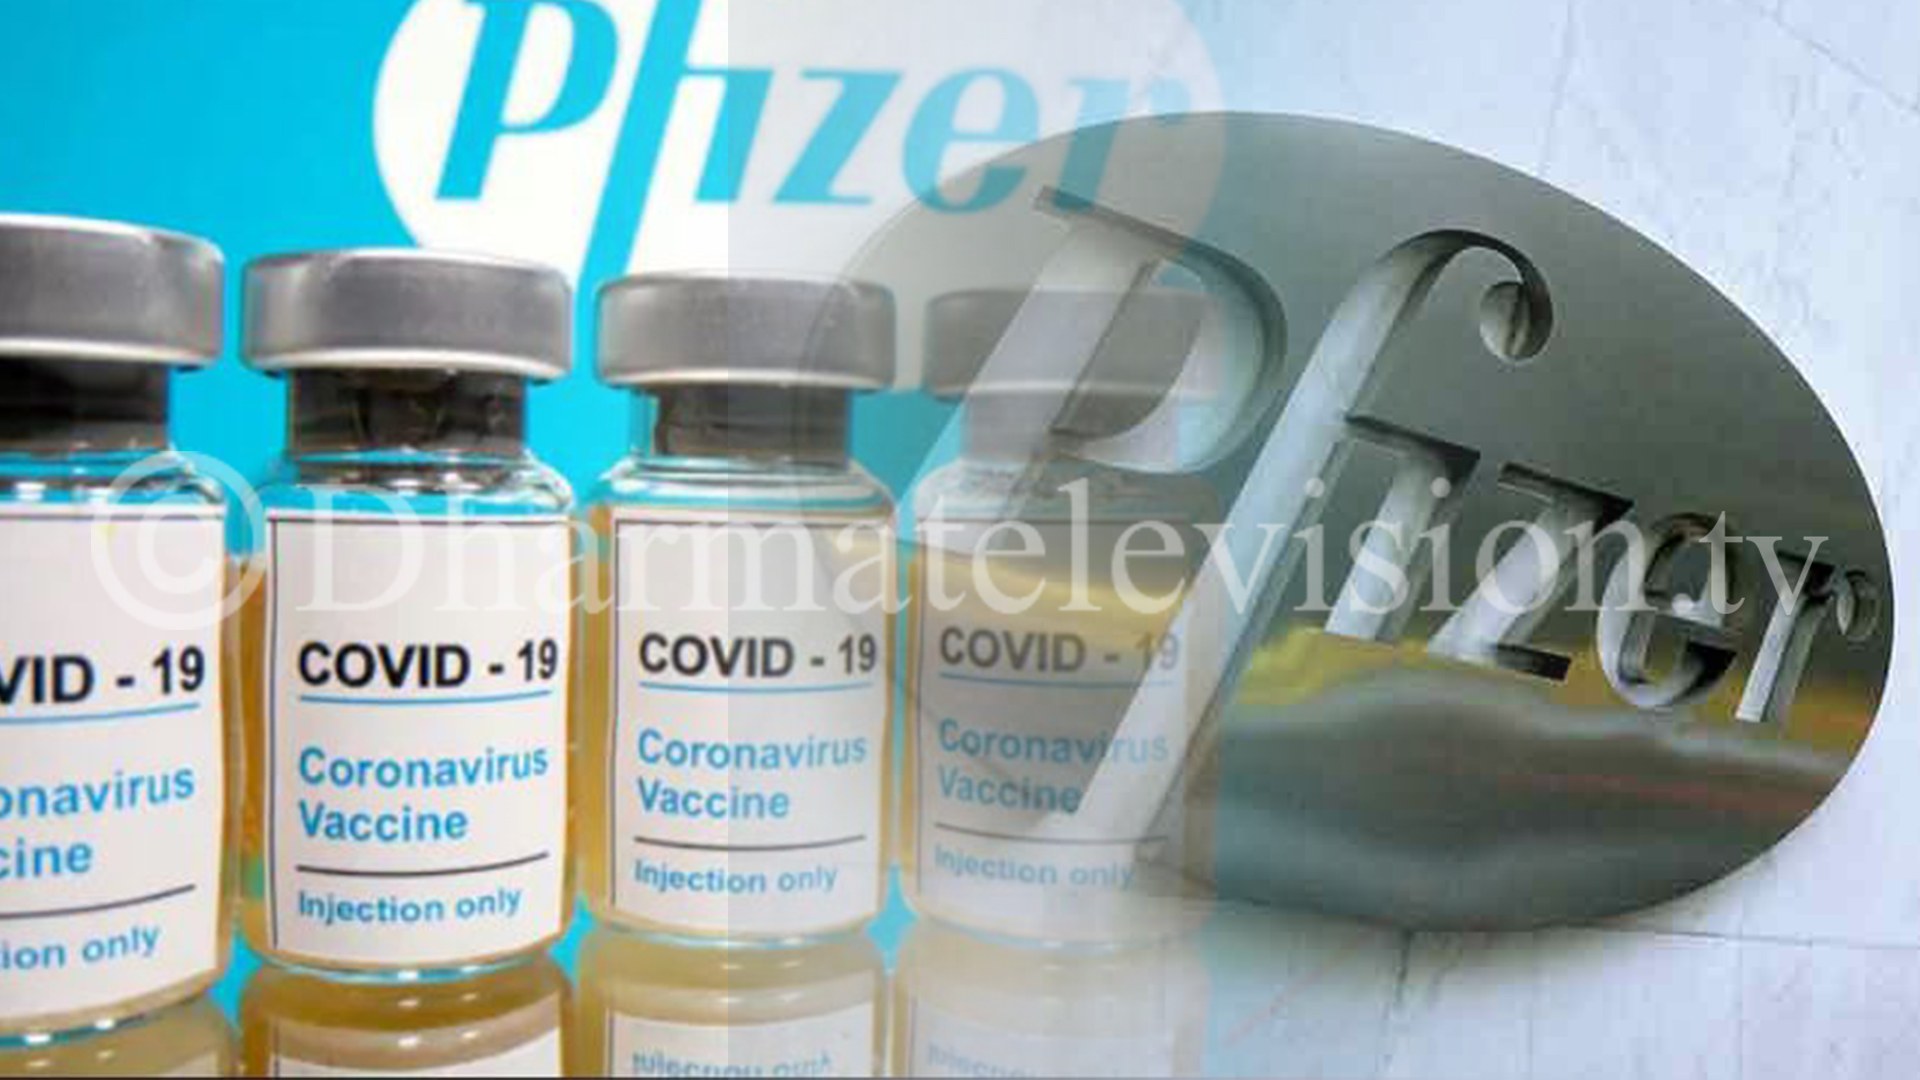 Covid-19 vaccine is more than 90% effective: Pfizer, BioNTech